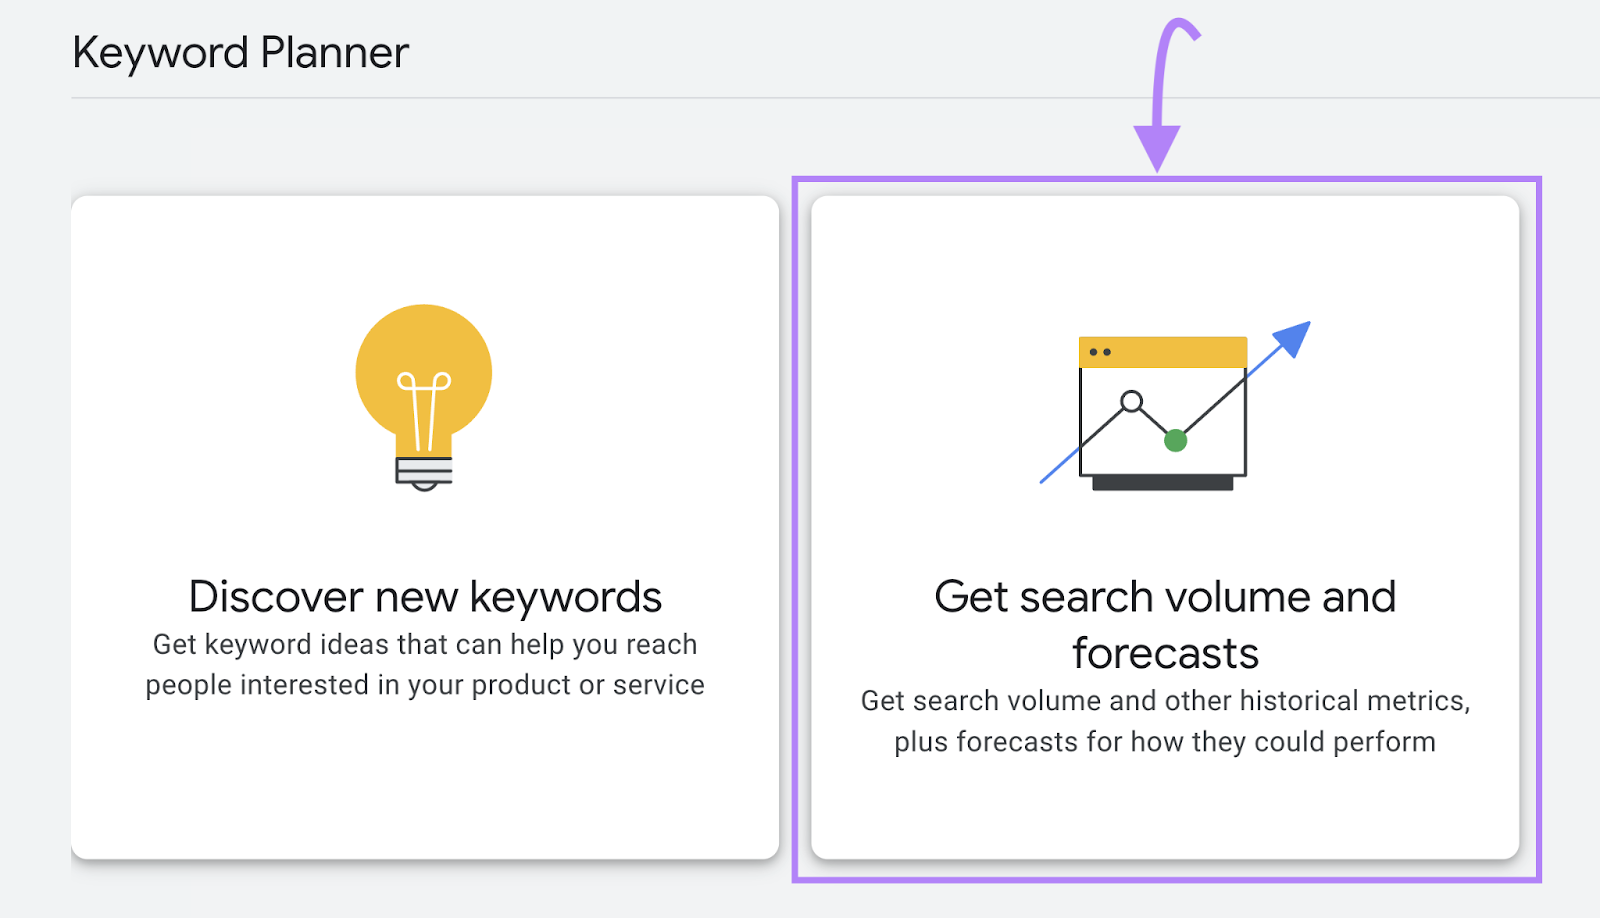 "Get search volume and forecasts" widget selected under Keyword Planner